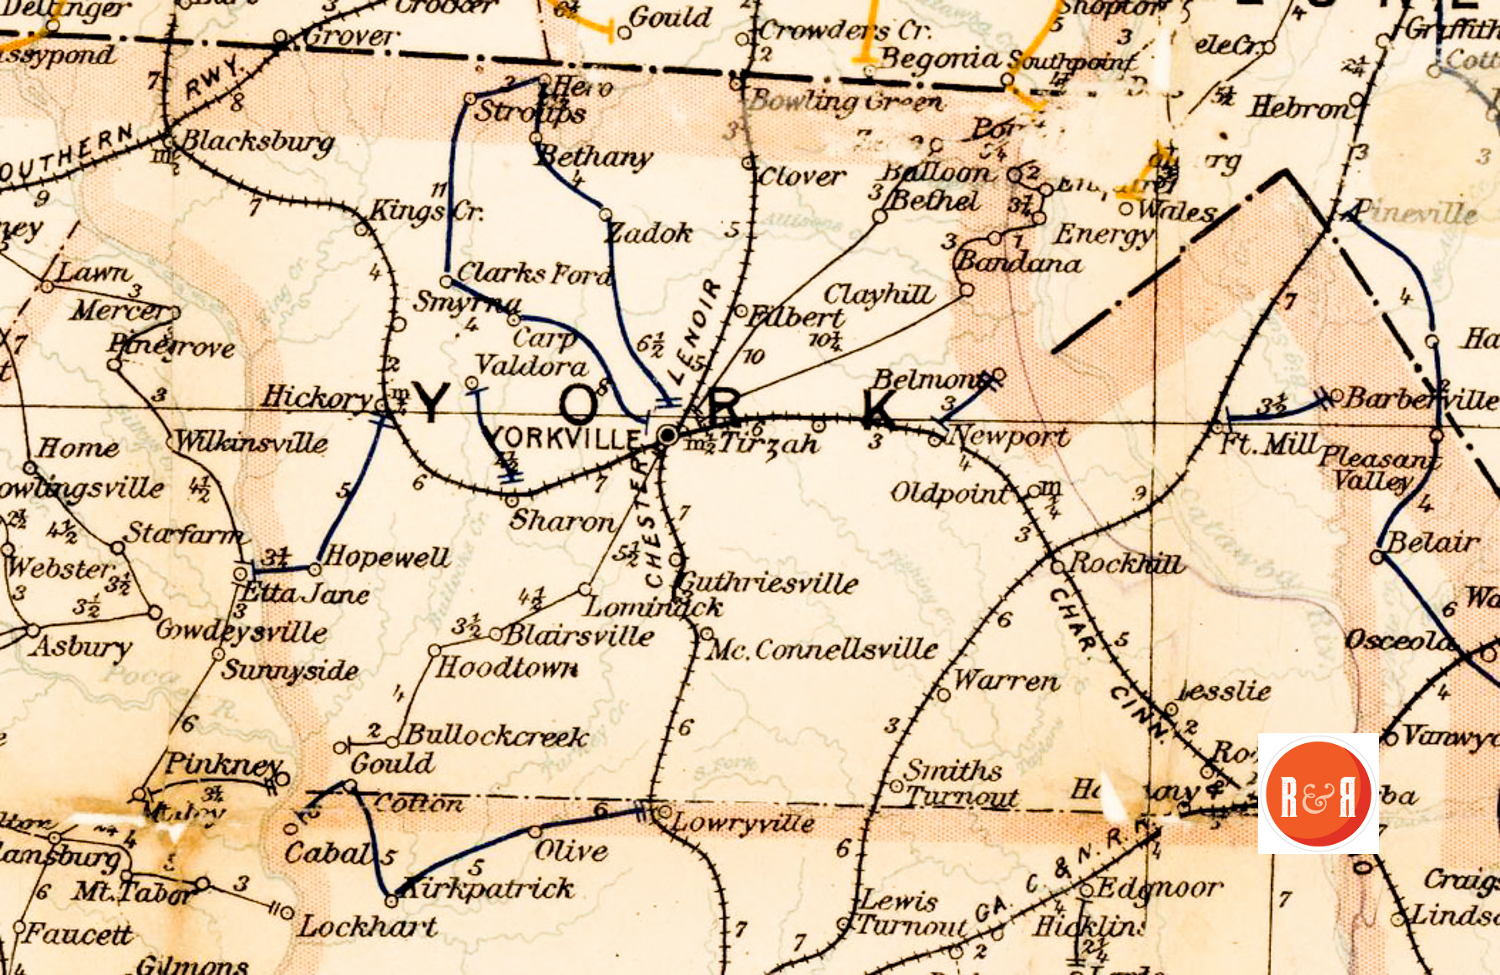 1850s MAP OF YORK AREA